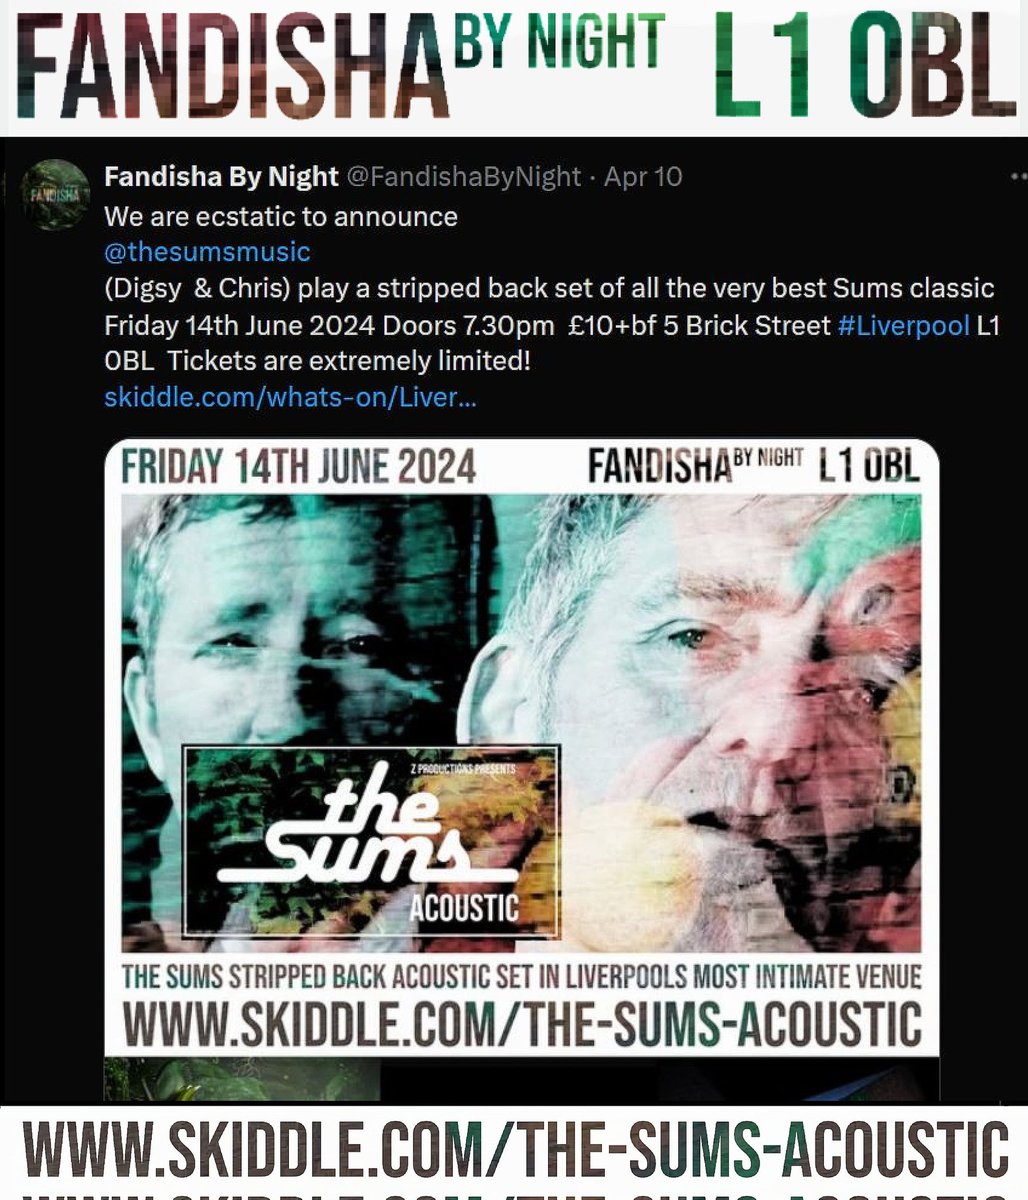 #Liverpool #FandishaByNight Friday 14th June @thesumsmusic Tickets Available skiddle.com/whats-on/Liver…